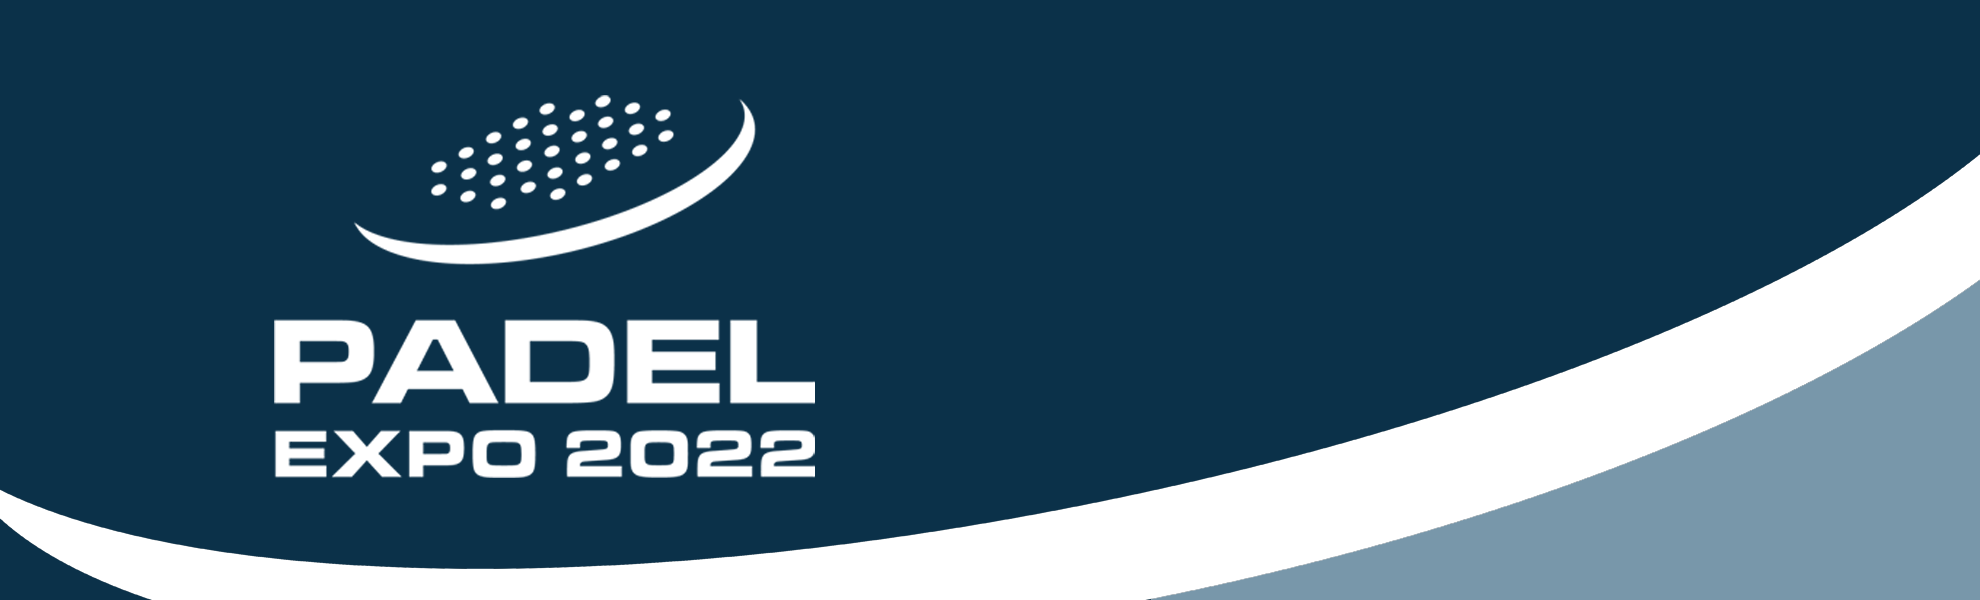 Header image for Padel Expo 2022